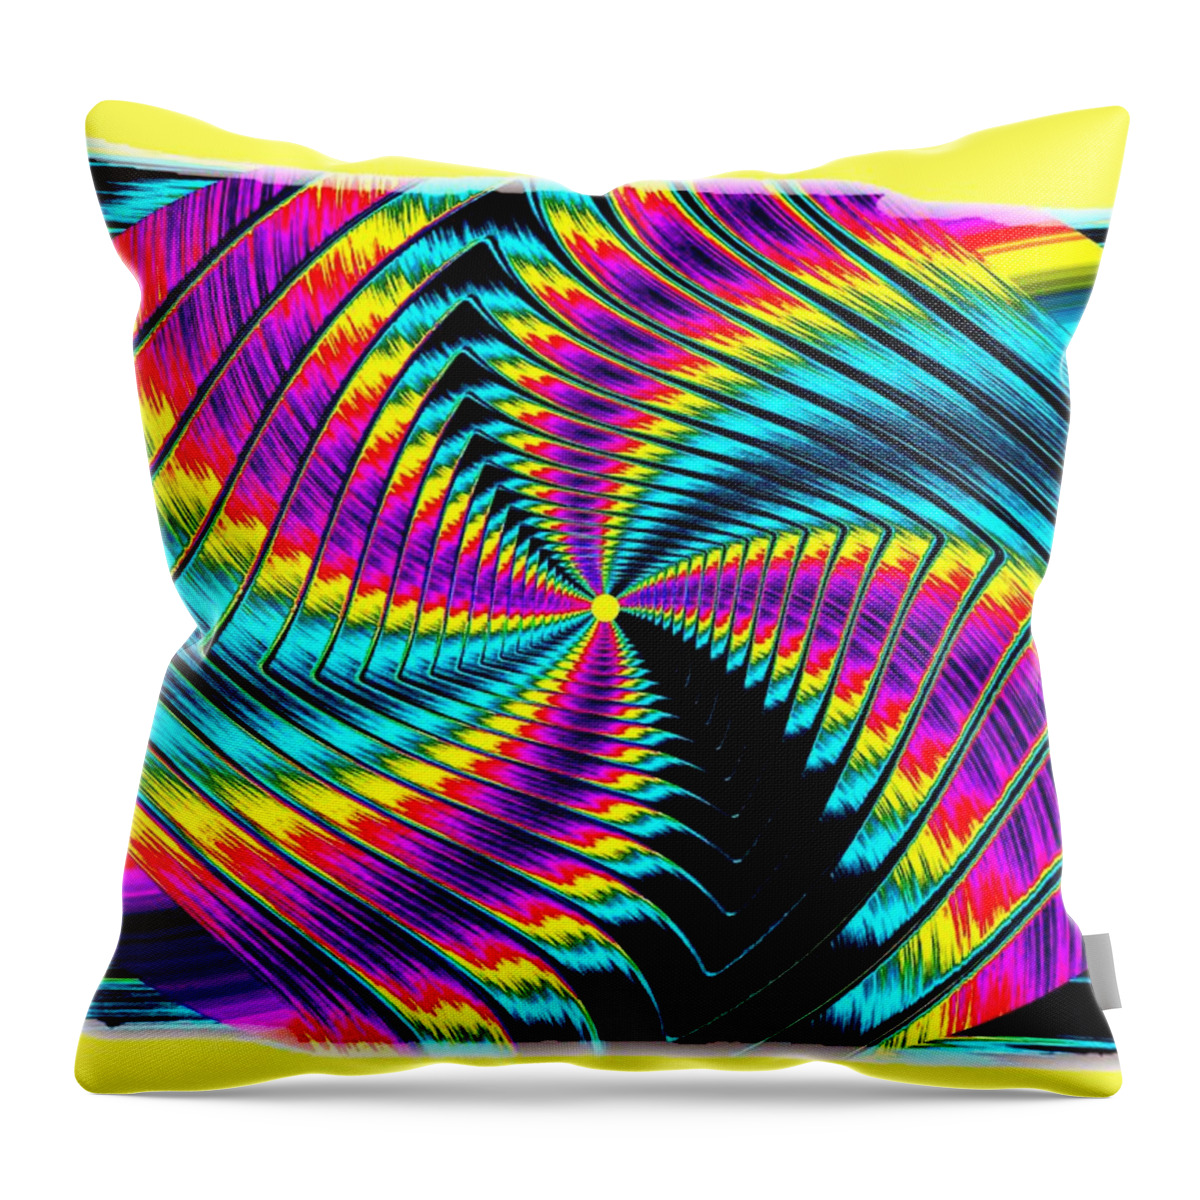 Pizzazz 50 Throw Pillow featuring the digital art Pizzazz 50 by Will Borden